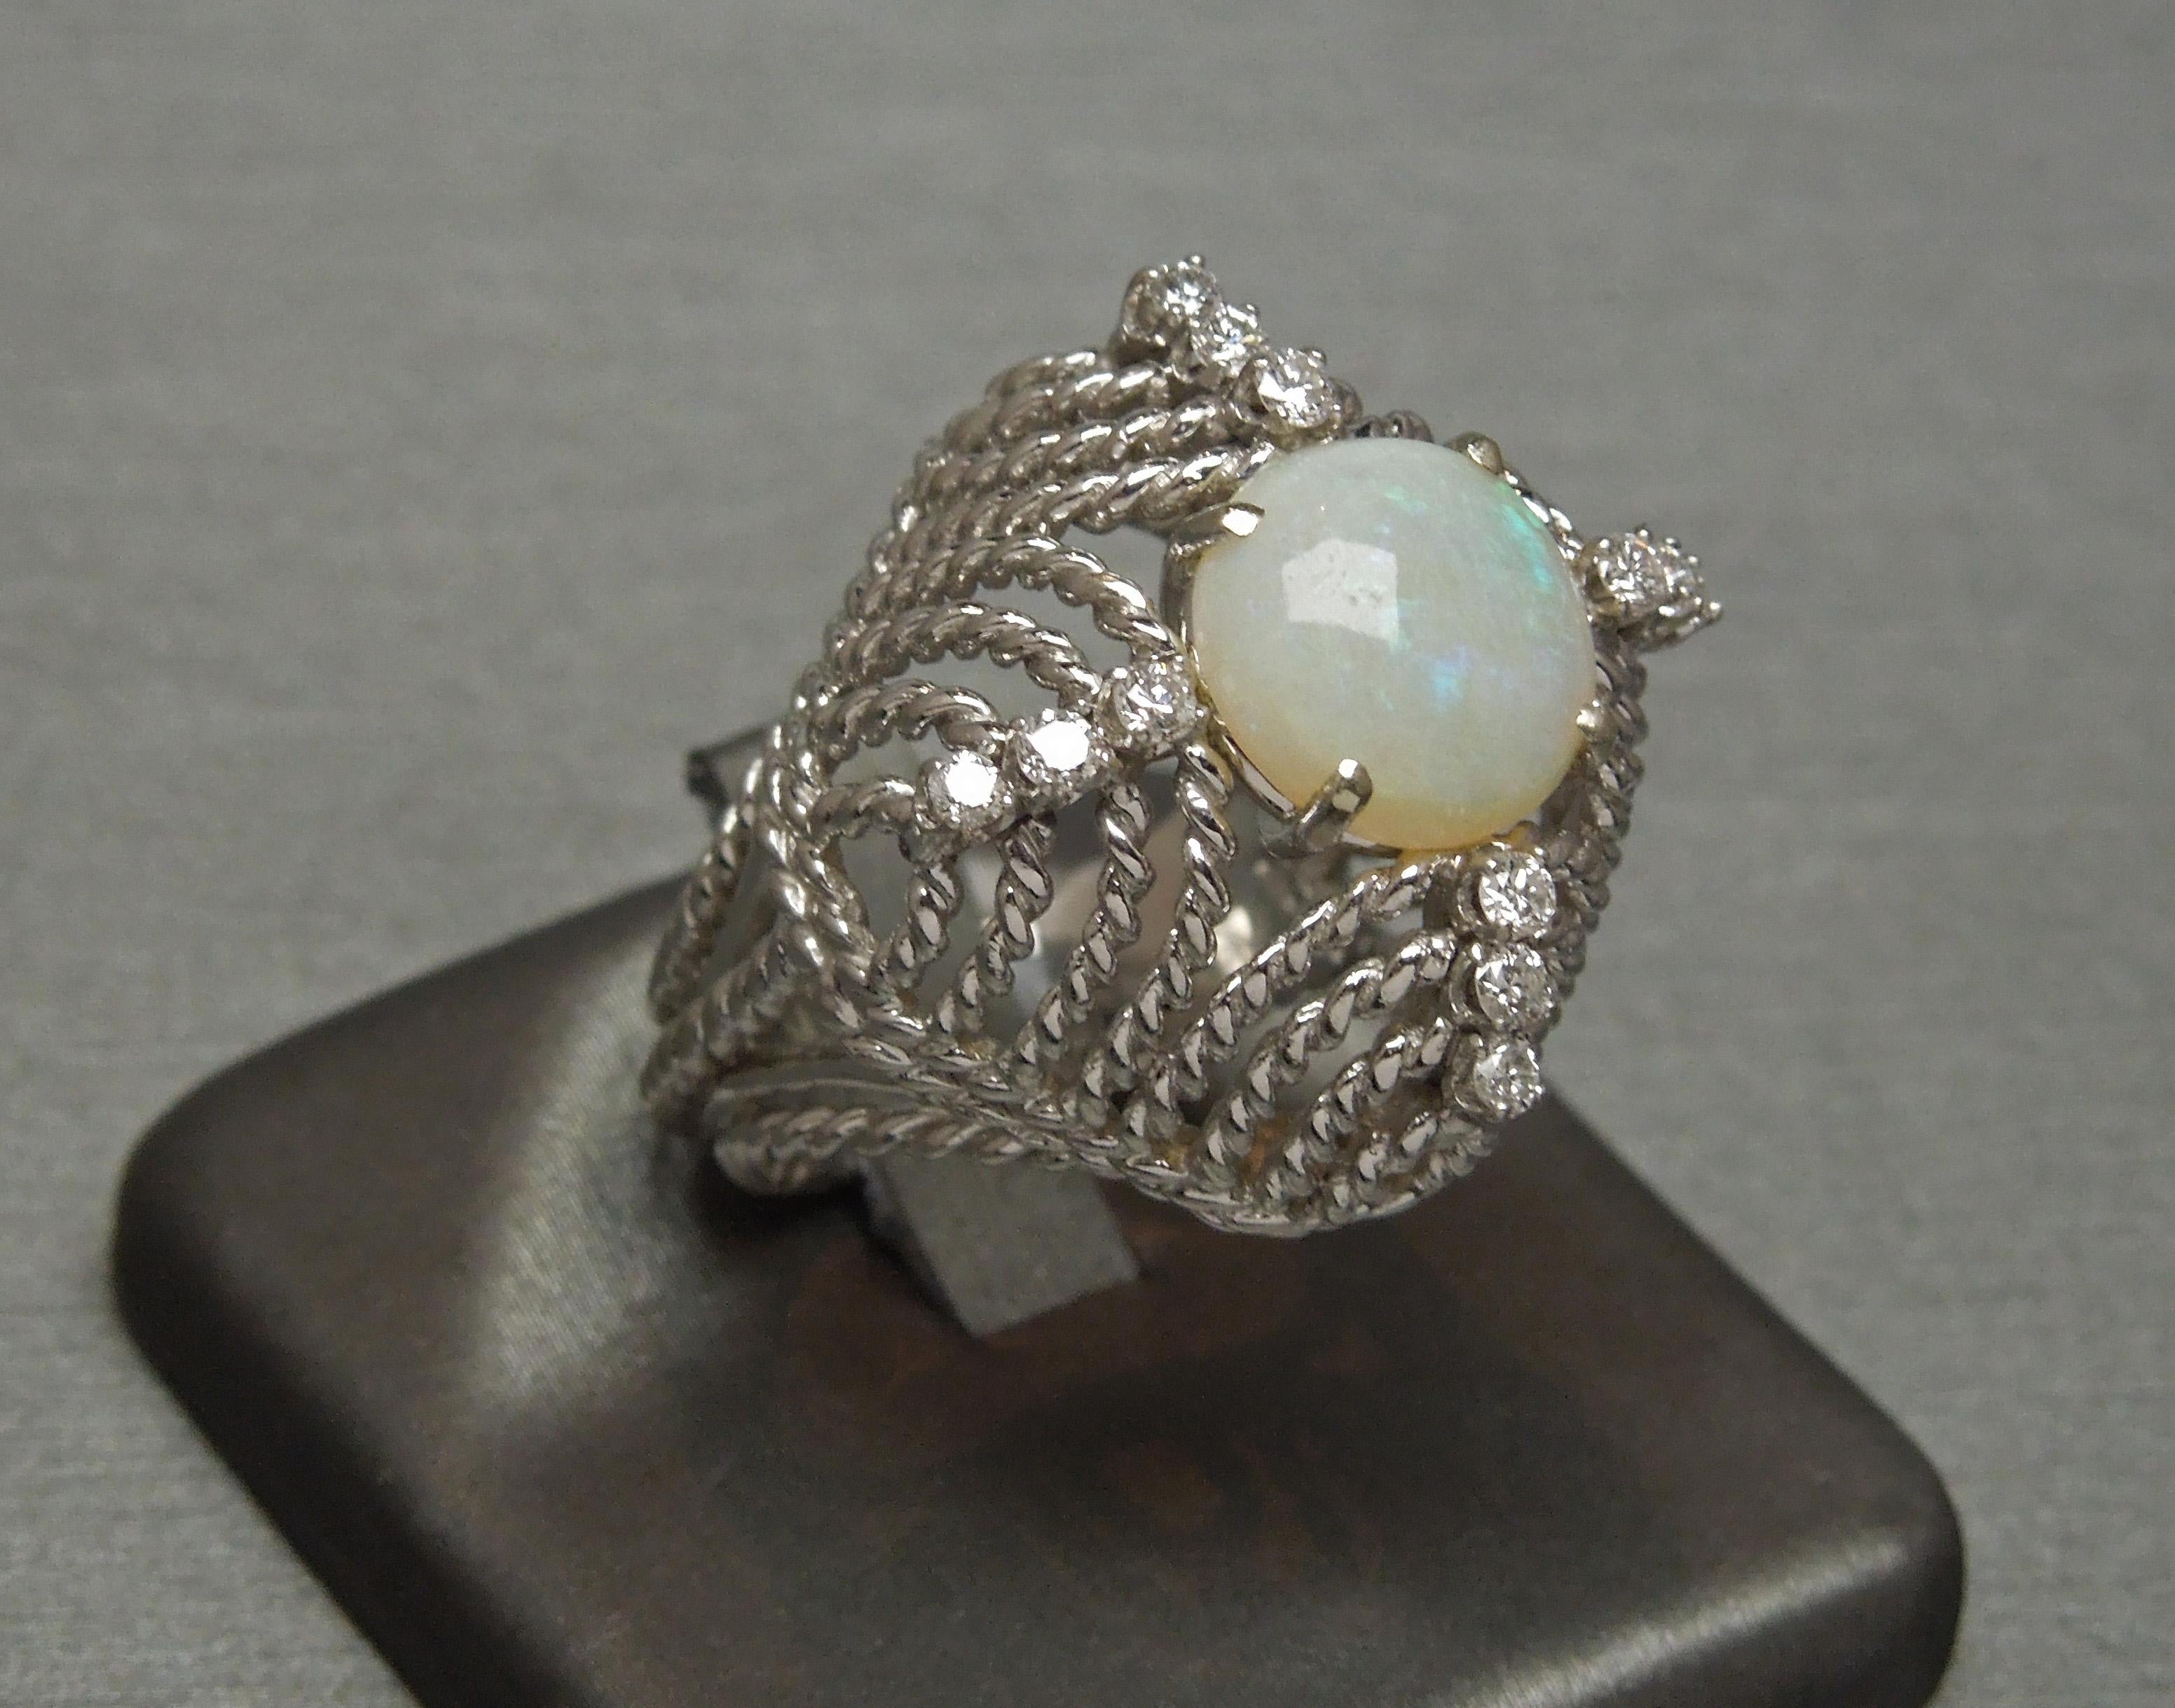 This Midcentury Opal Dome Ring features a central Round Australian Fire Opal at 9.5mm in diameter, secured in a 4-Prong setting. Opal, along with Tourmaline is the birthstone for those born in the month of October. Accented with 12 Colorless Nearly